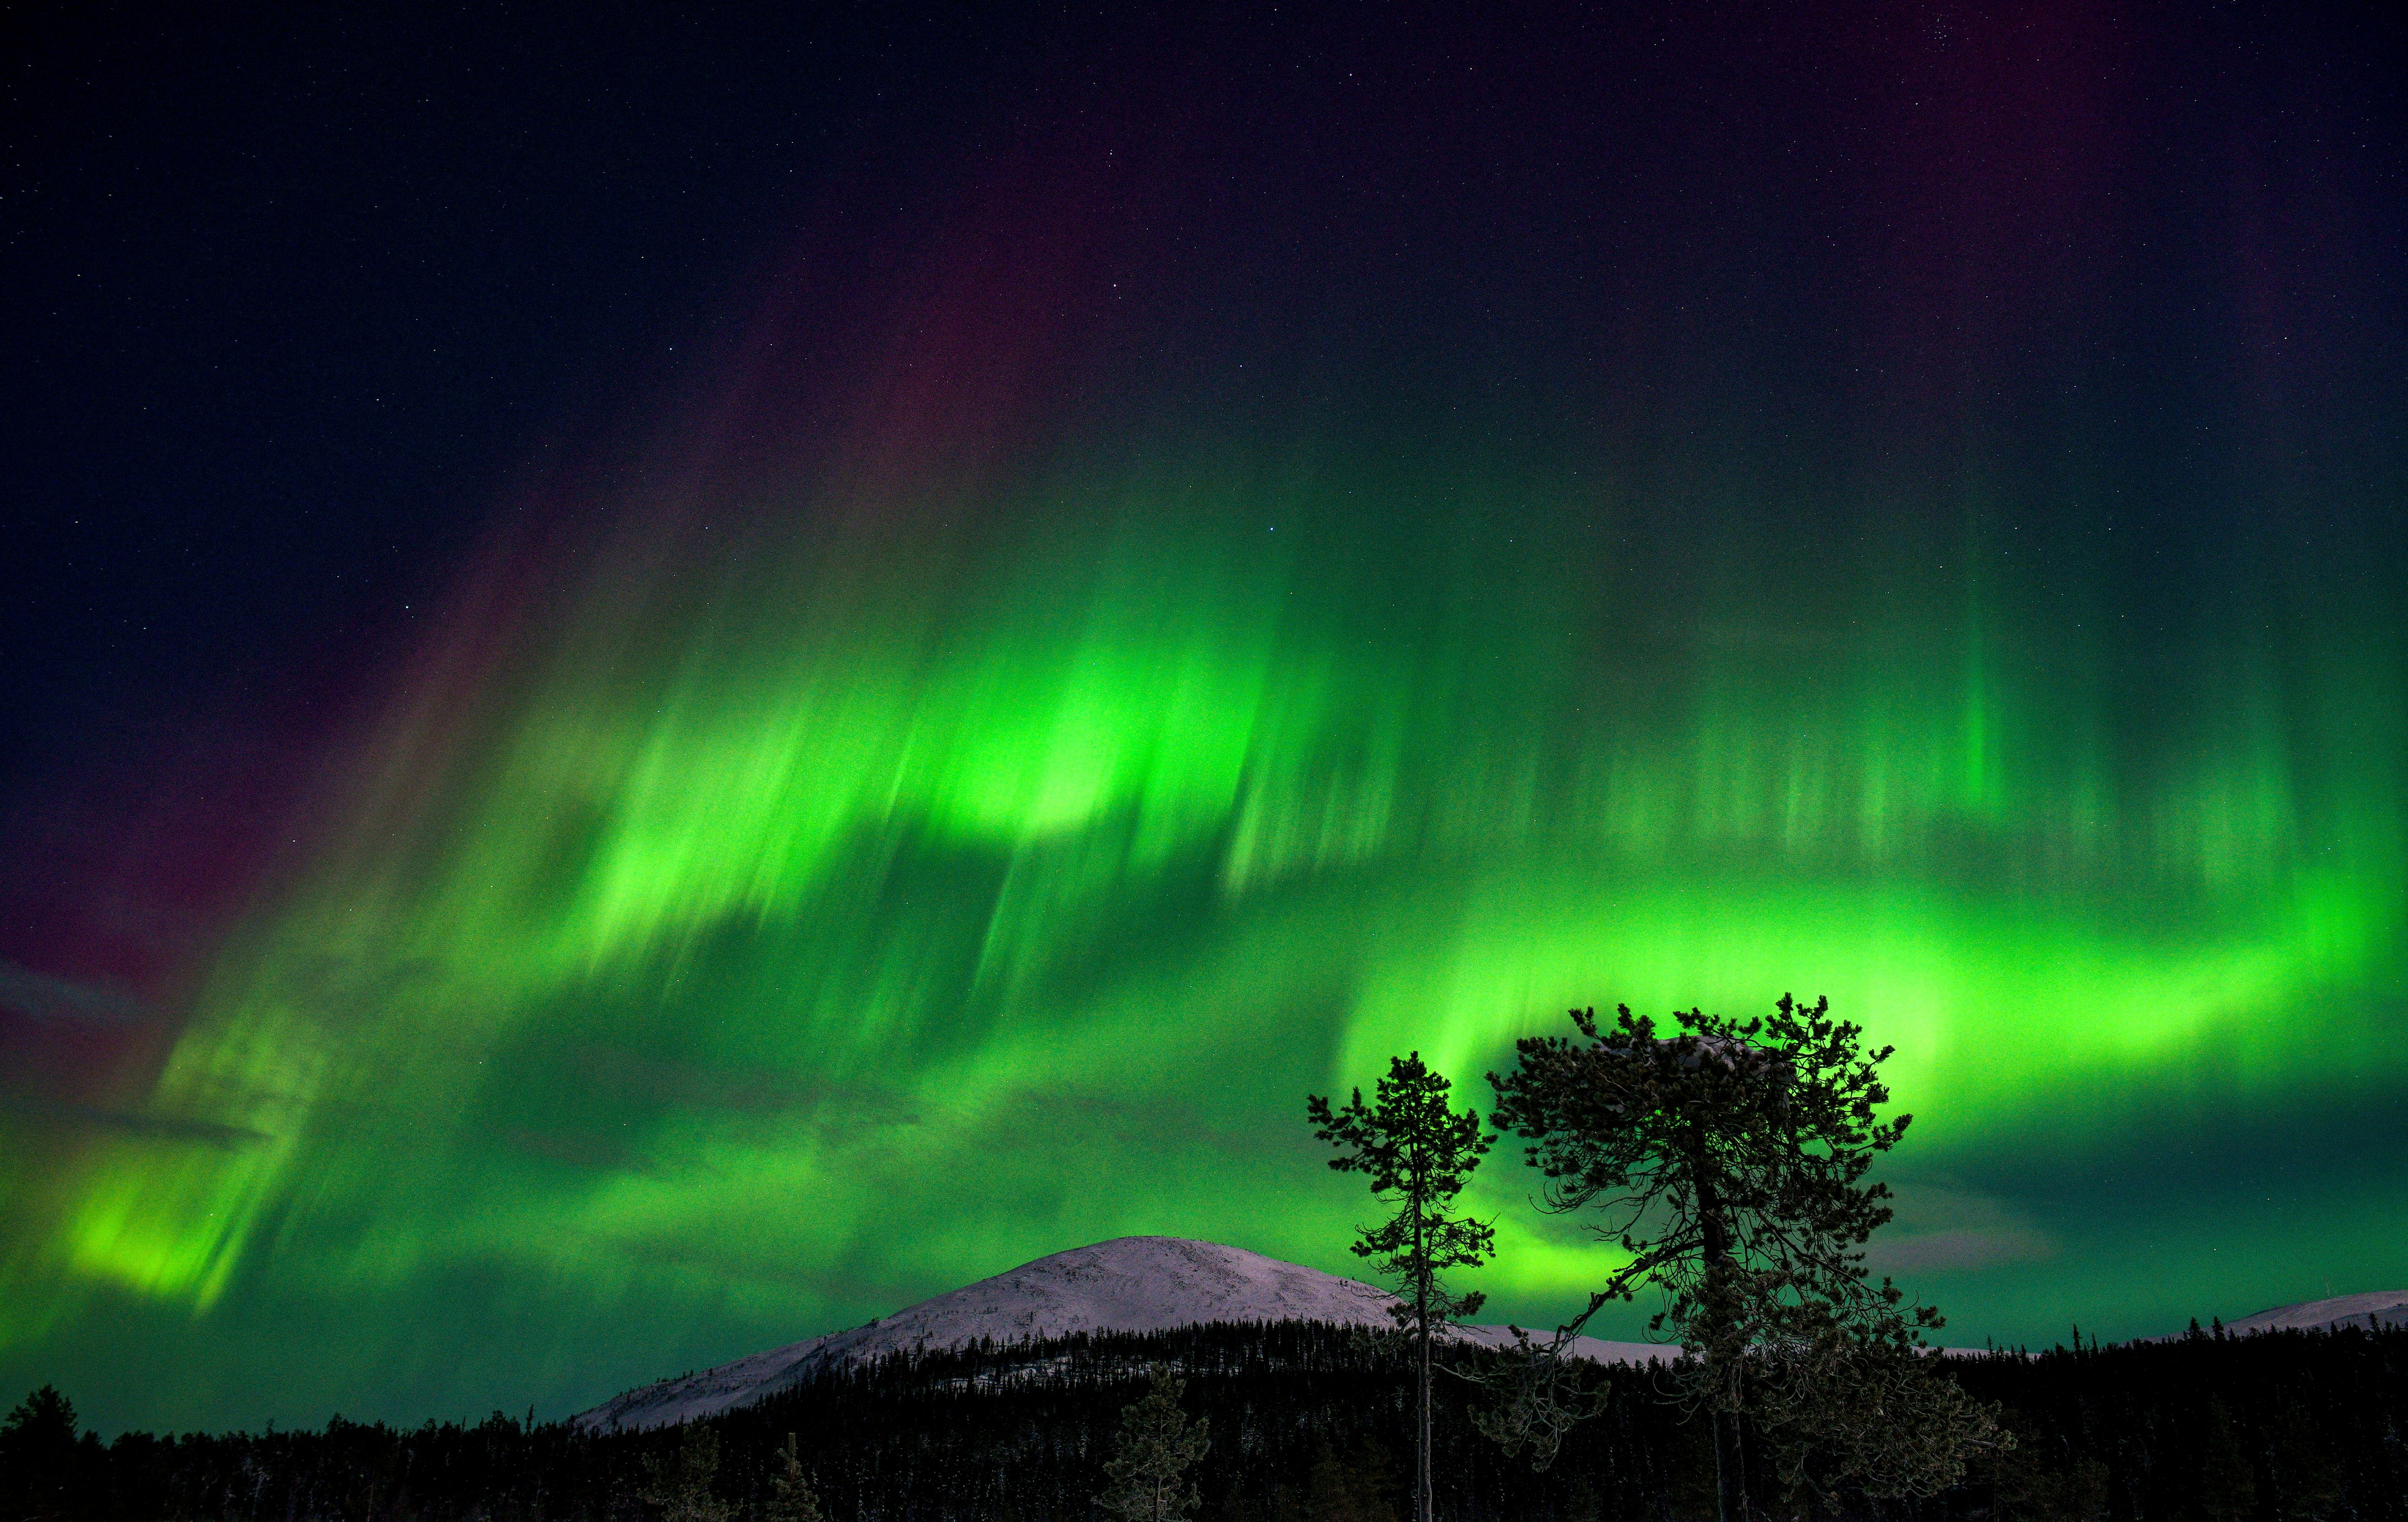 About - Aurora Borealis: where to see the Northern Lights?